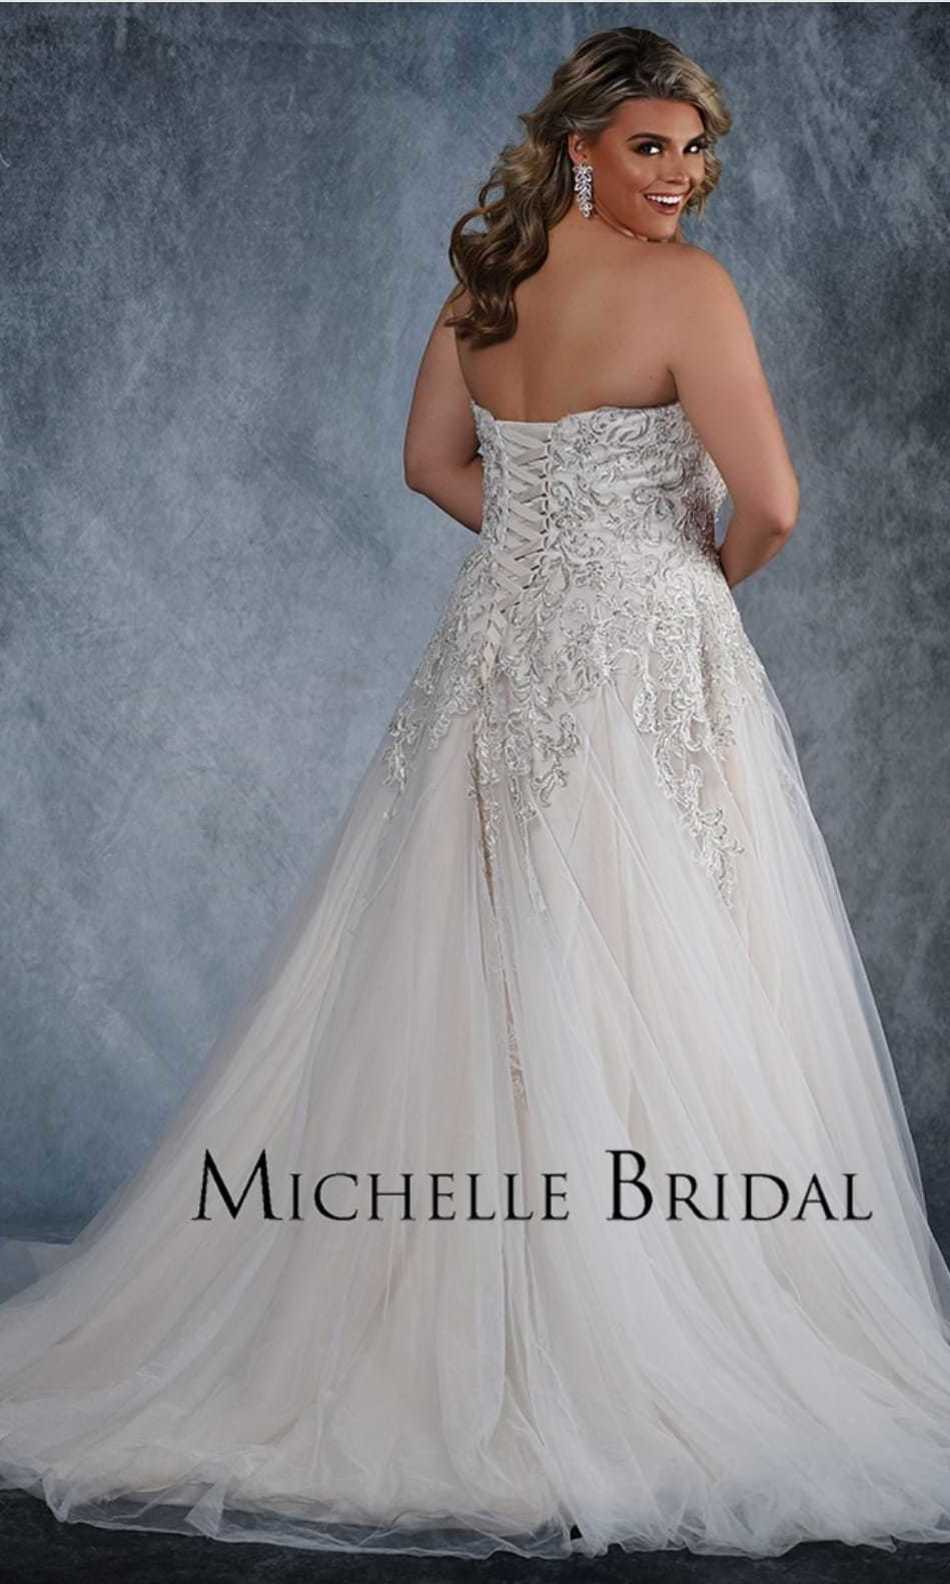 Michelle Bridal 'Vanessa' New to order Back